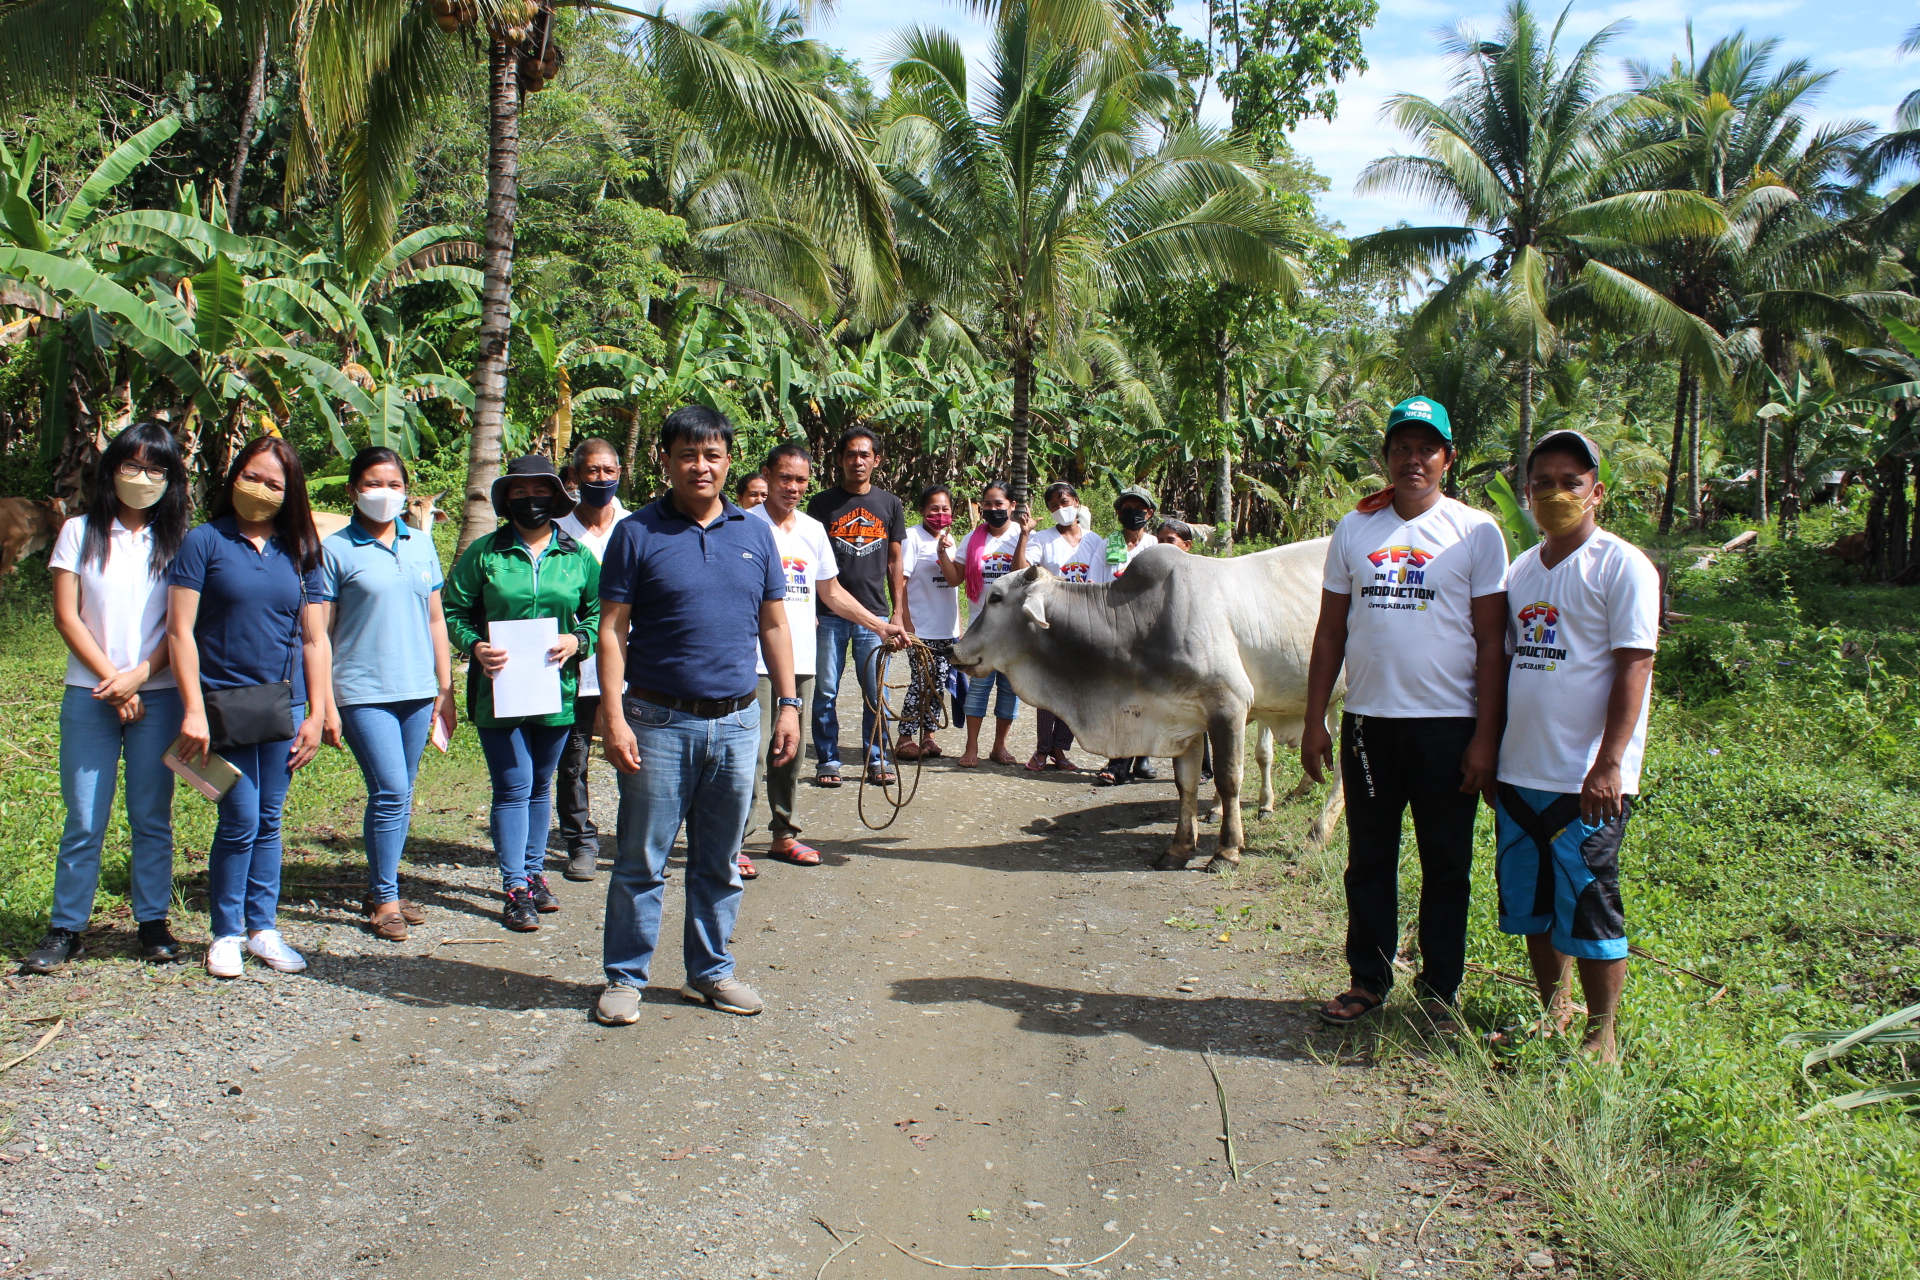 National Director visits SAAD Bukidnon farmers, leads the turnover of agri-assistance